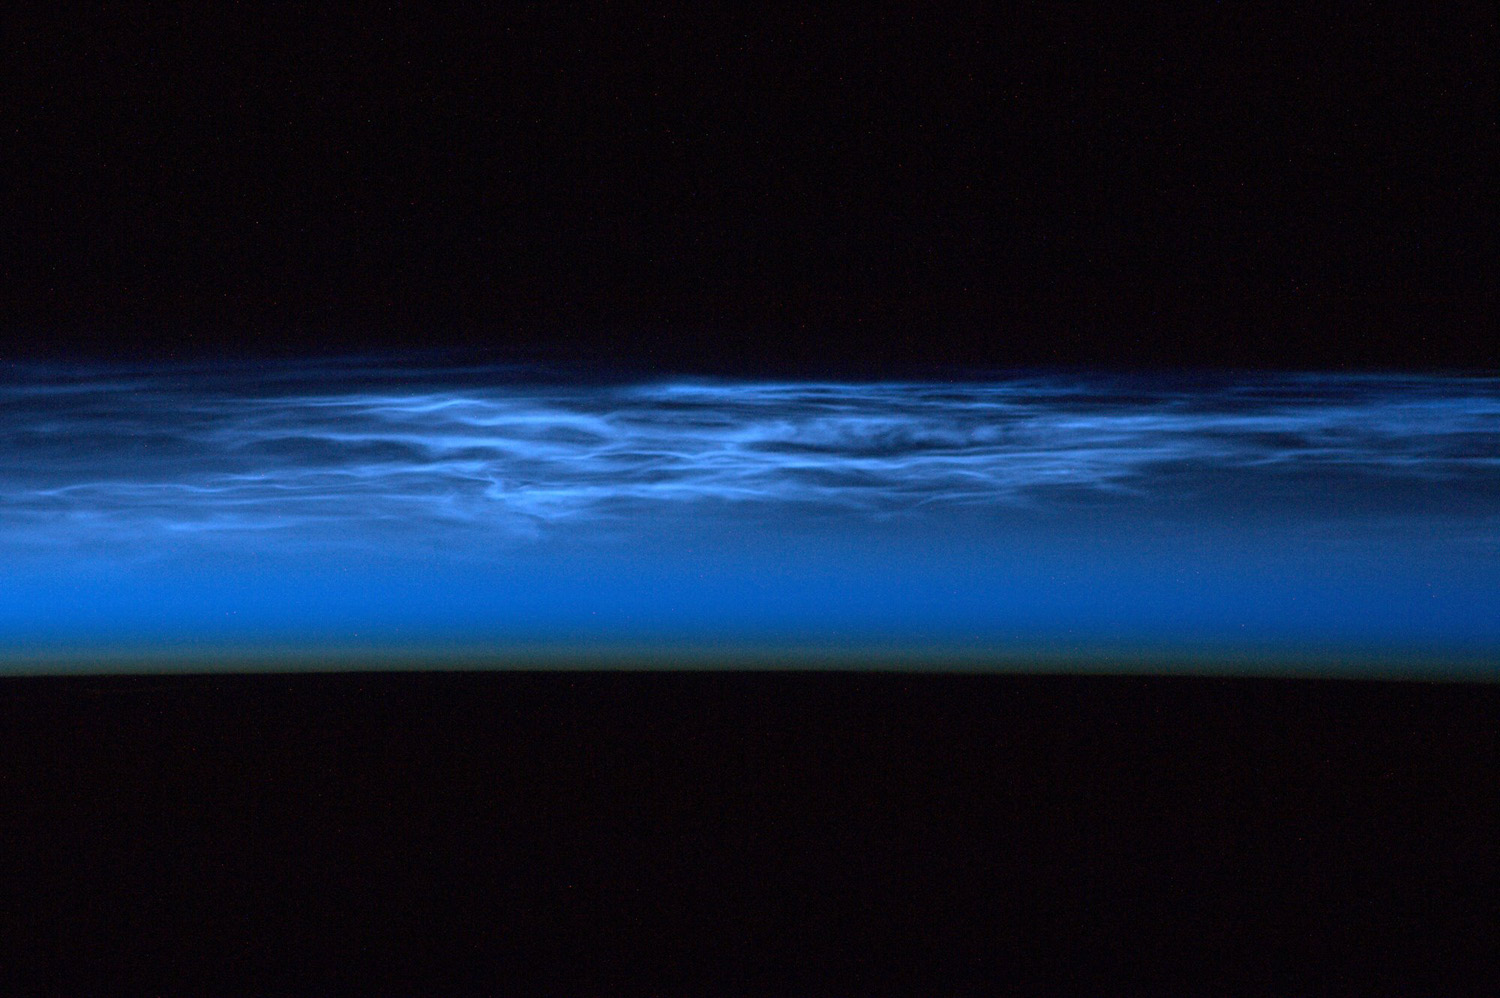 Noctilucent clouds from orbit (high altitude clouds at 82 km seen in polar regions)